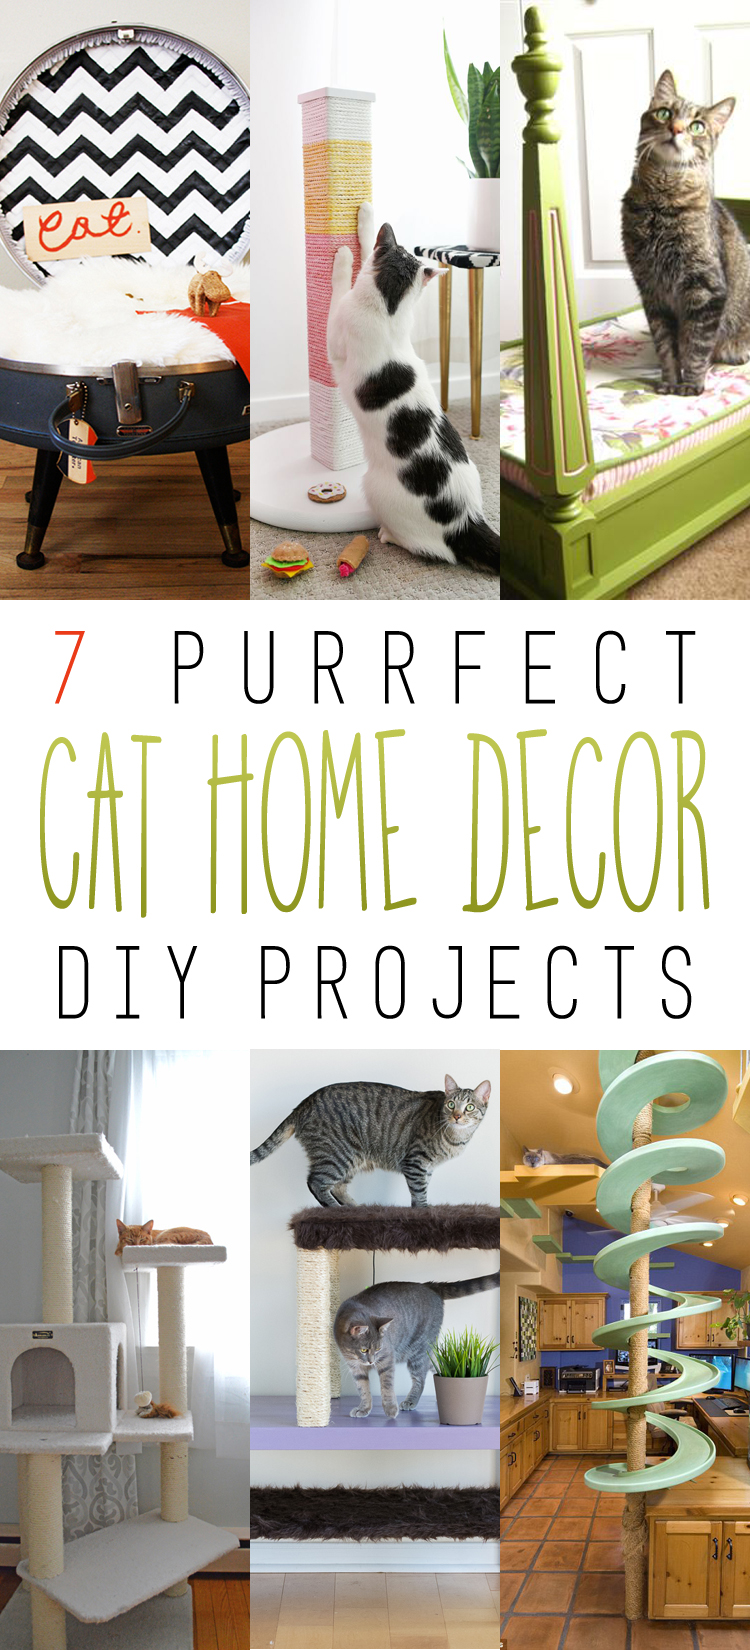 7 Purrfect Home Decor Cat DIY Projects - The Cottage Market